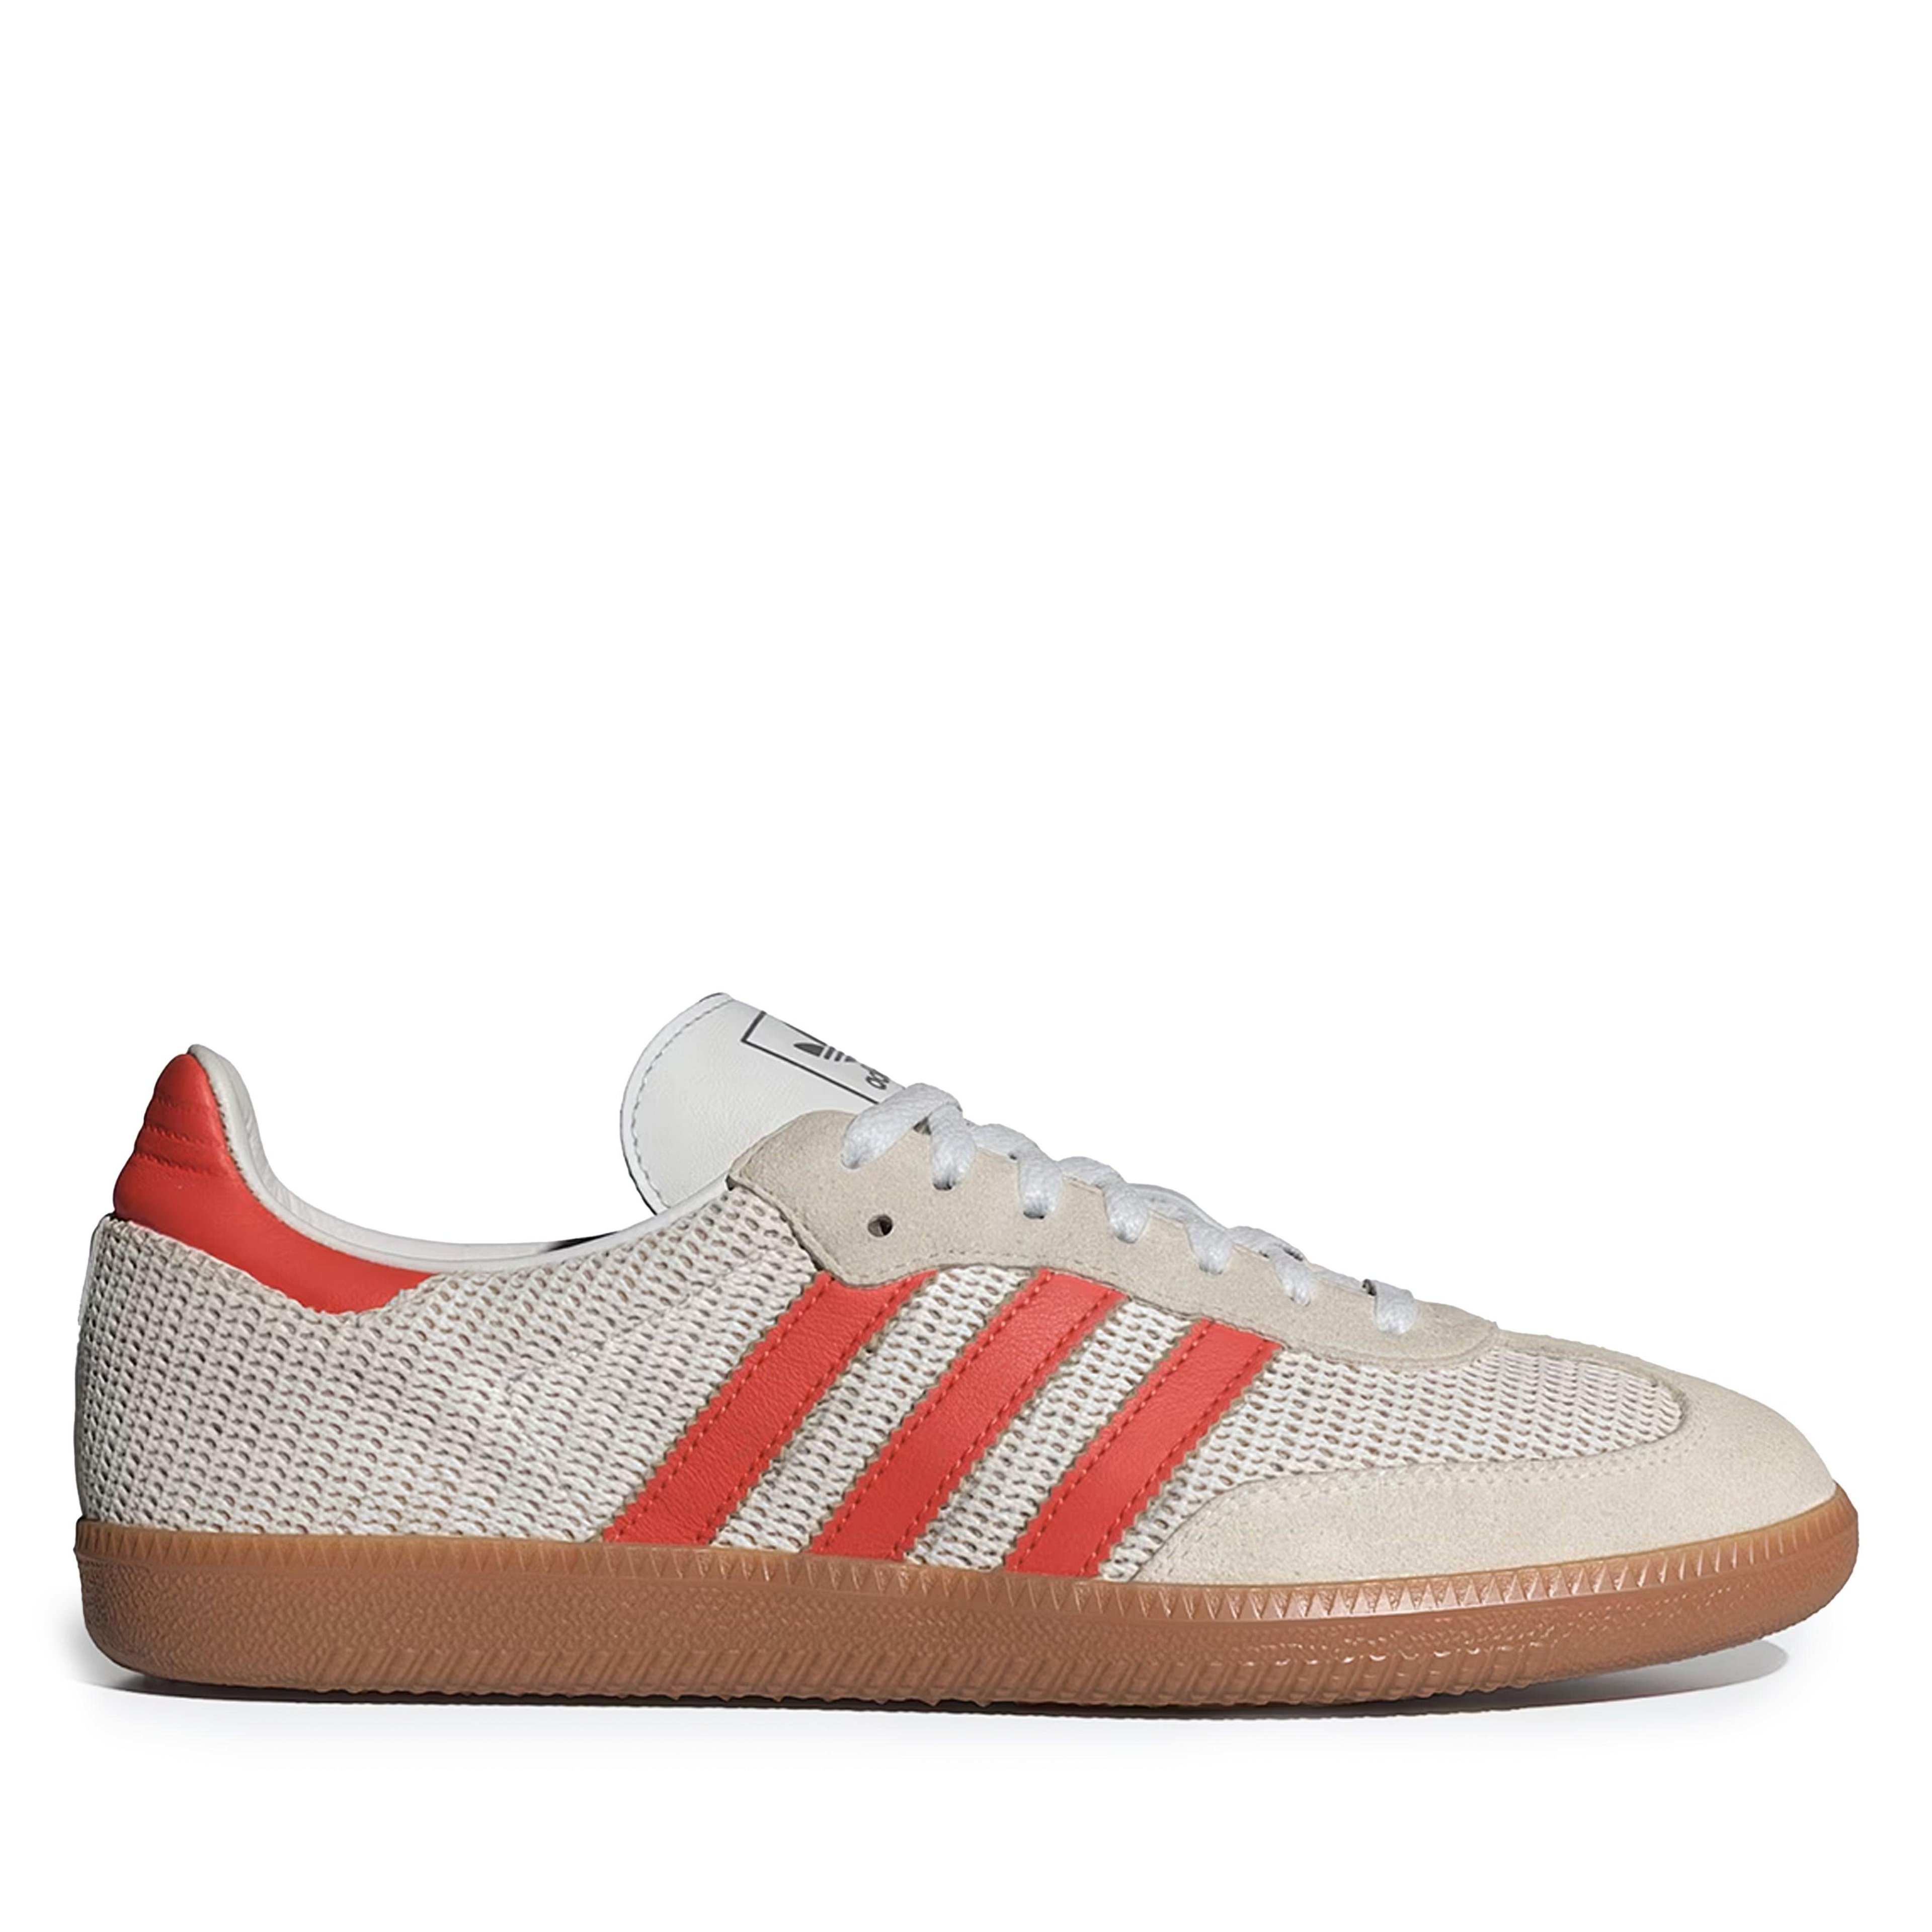 Adidas - Samba OG Sneakers - (White/Red) by ADIDAS